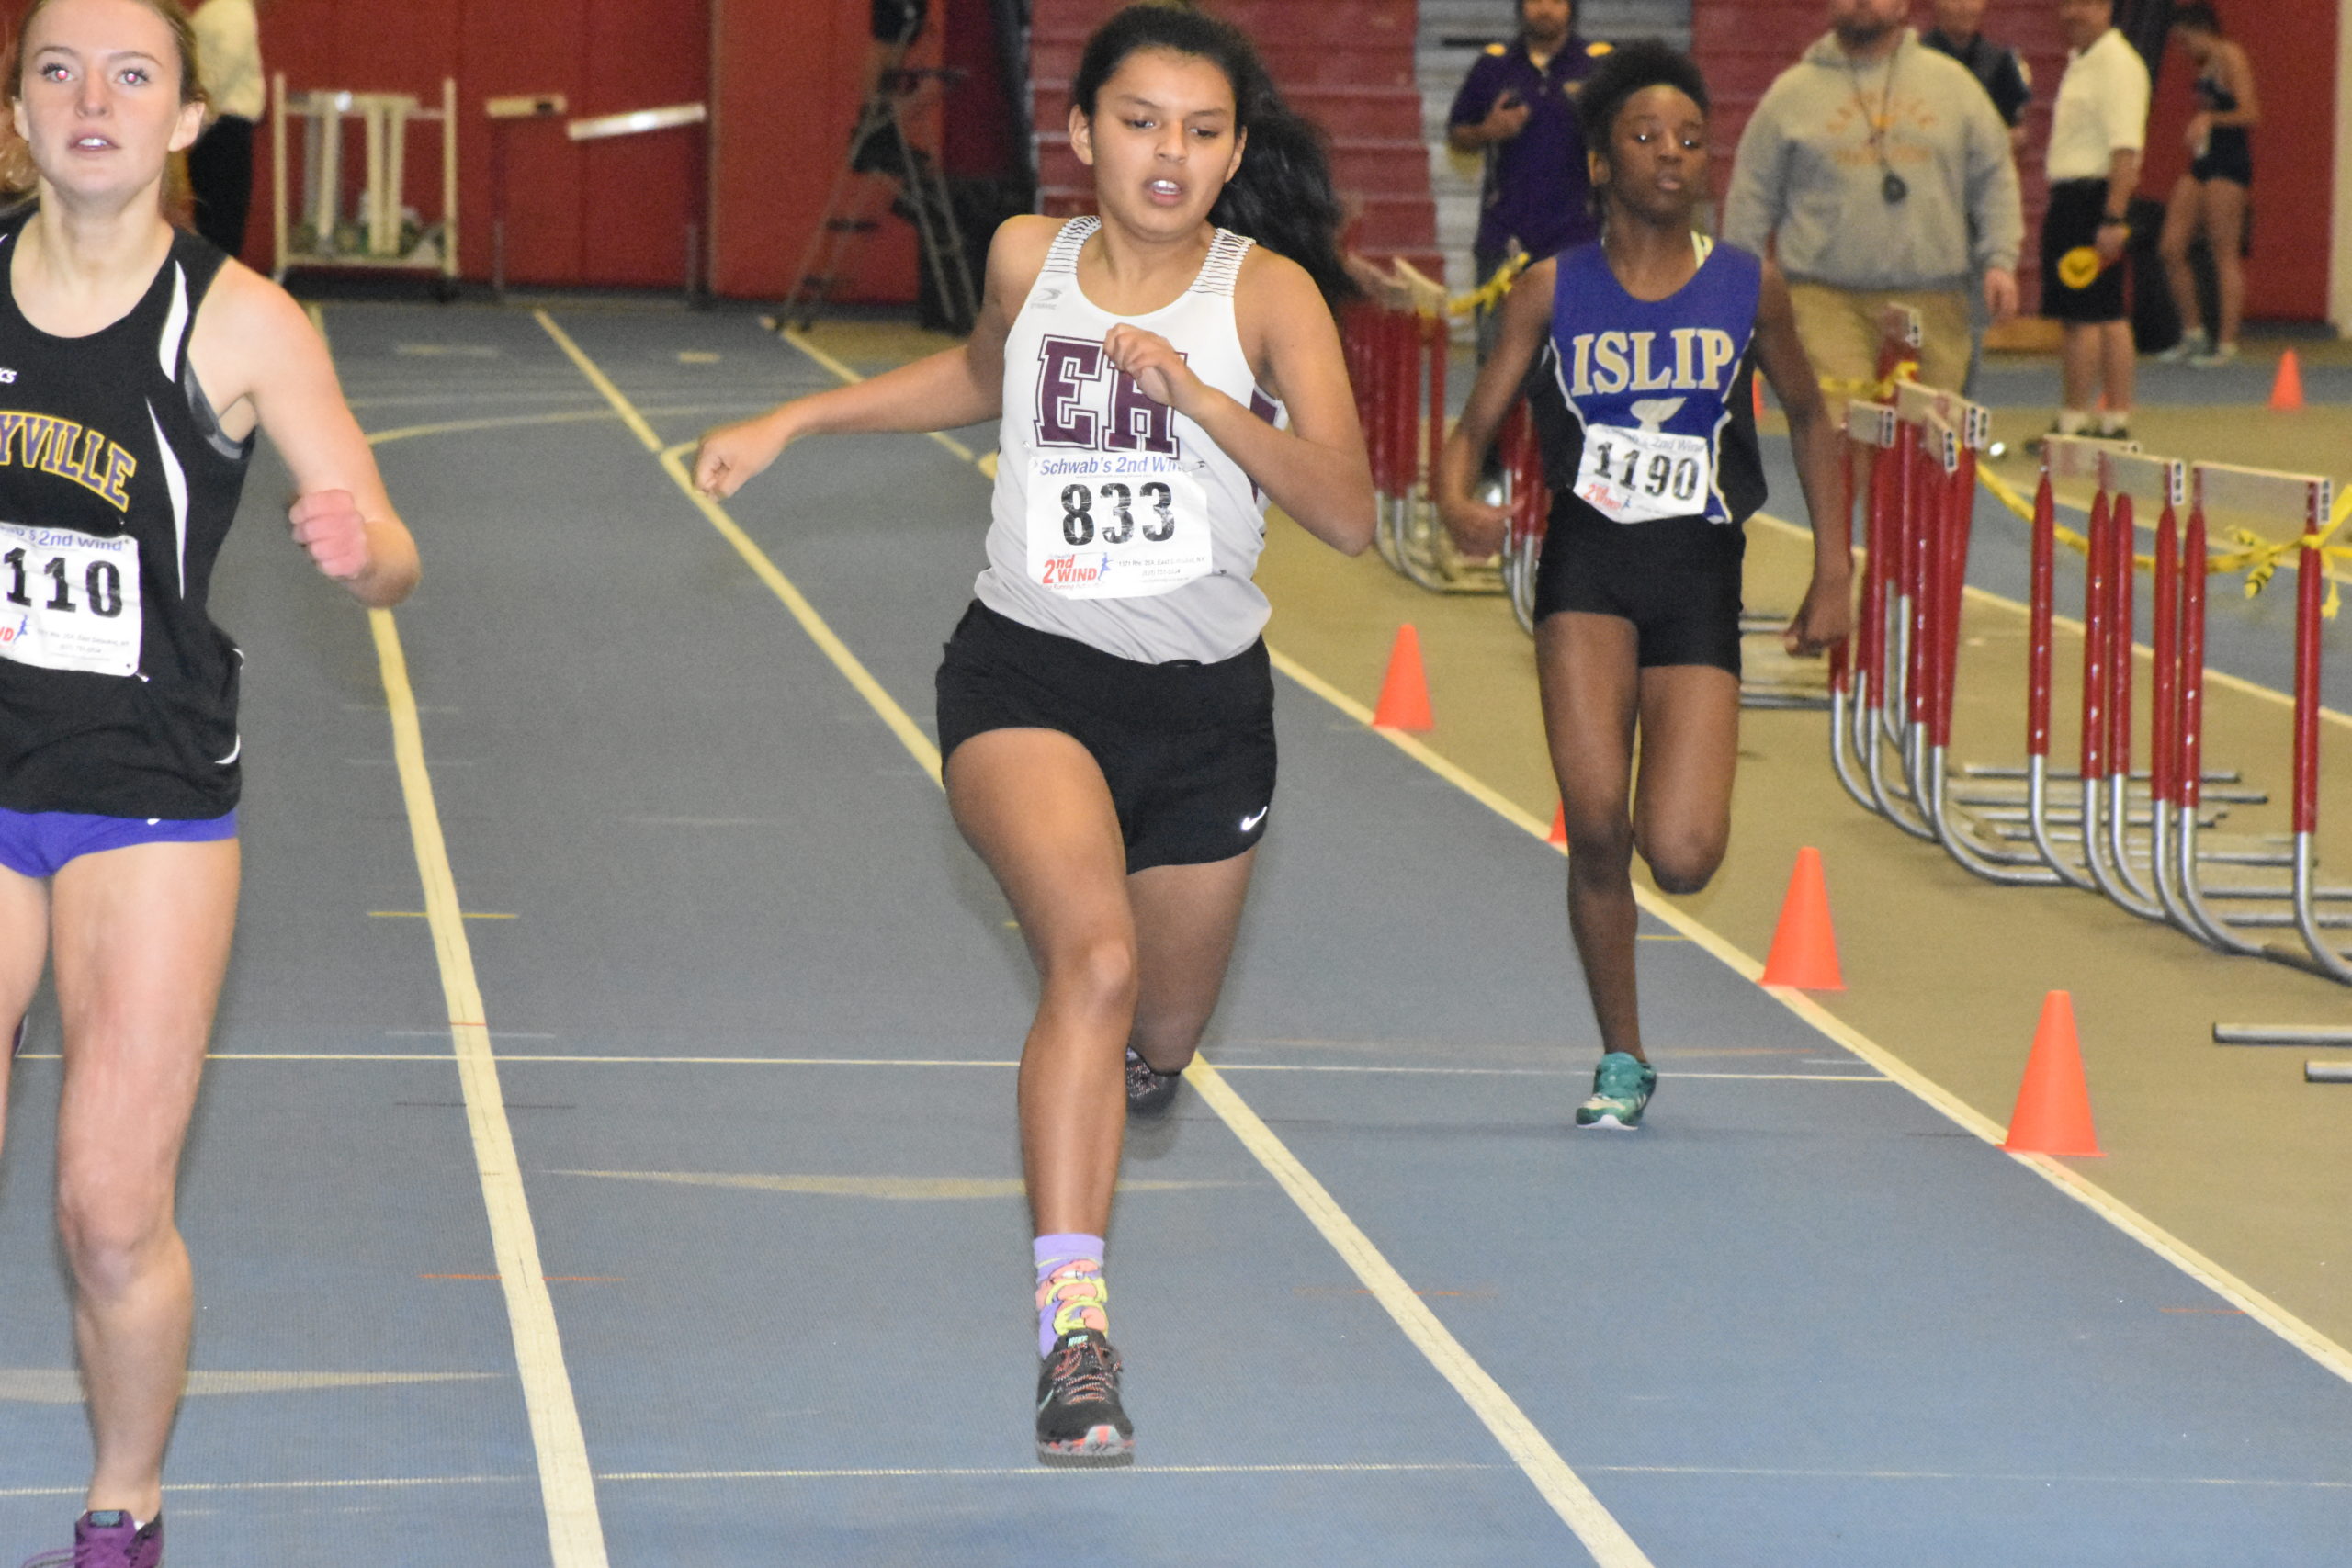 East Hampton senior Lillie Minskoff competed in three separate events at leagues. Her highest placement came in the 300-meter dash, which she finished eighth in.